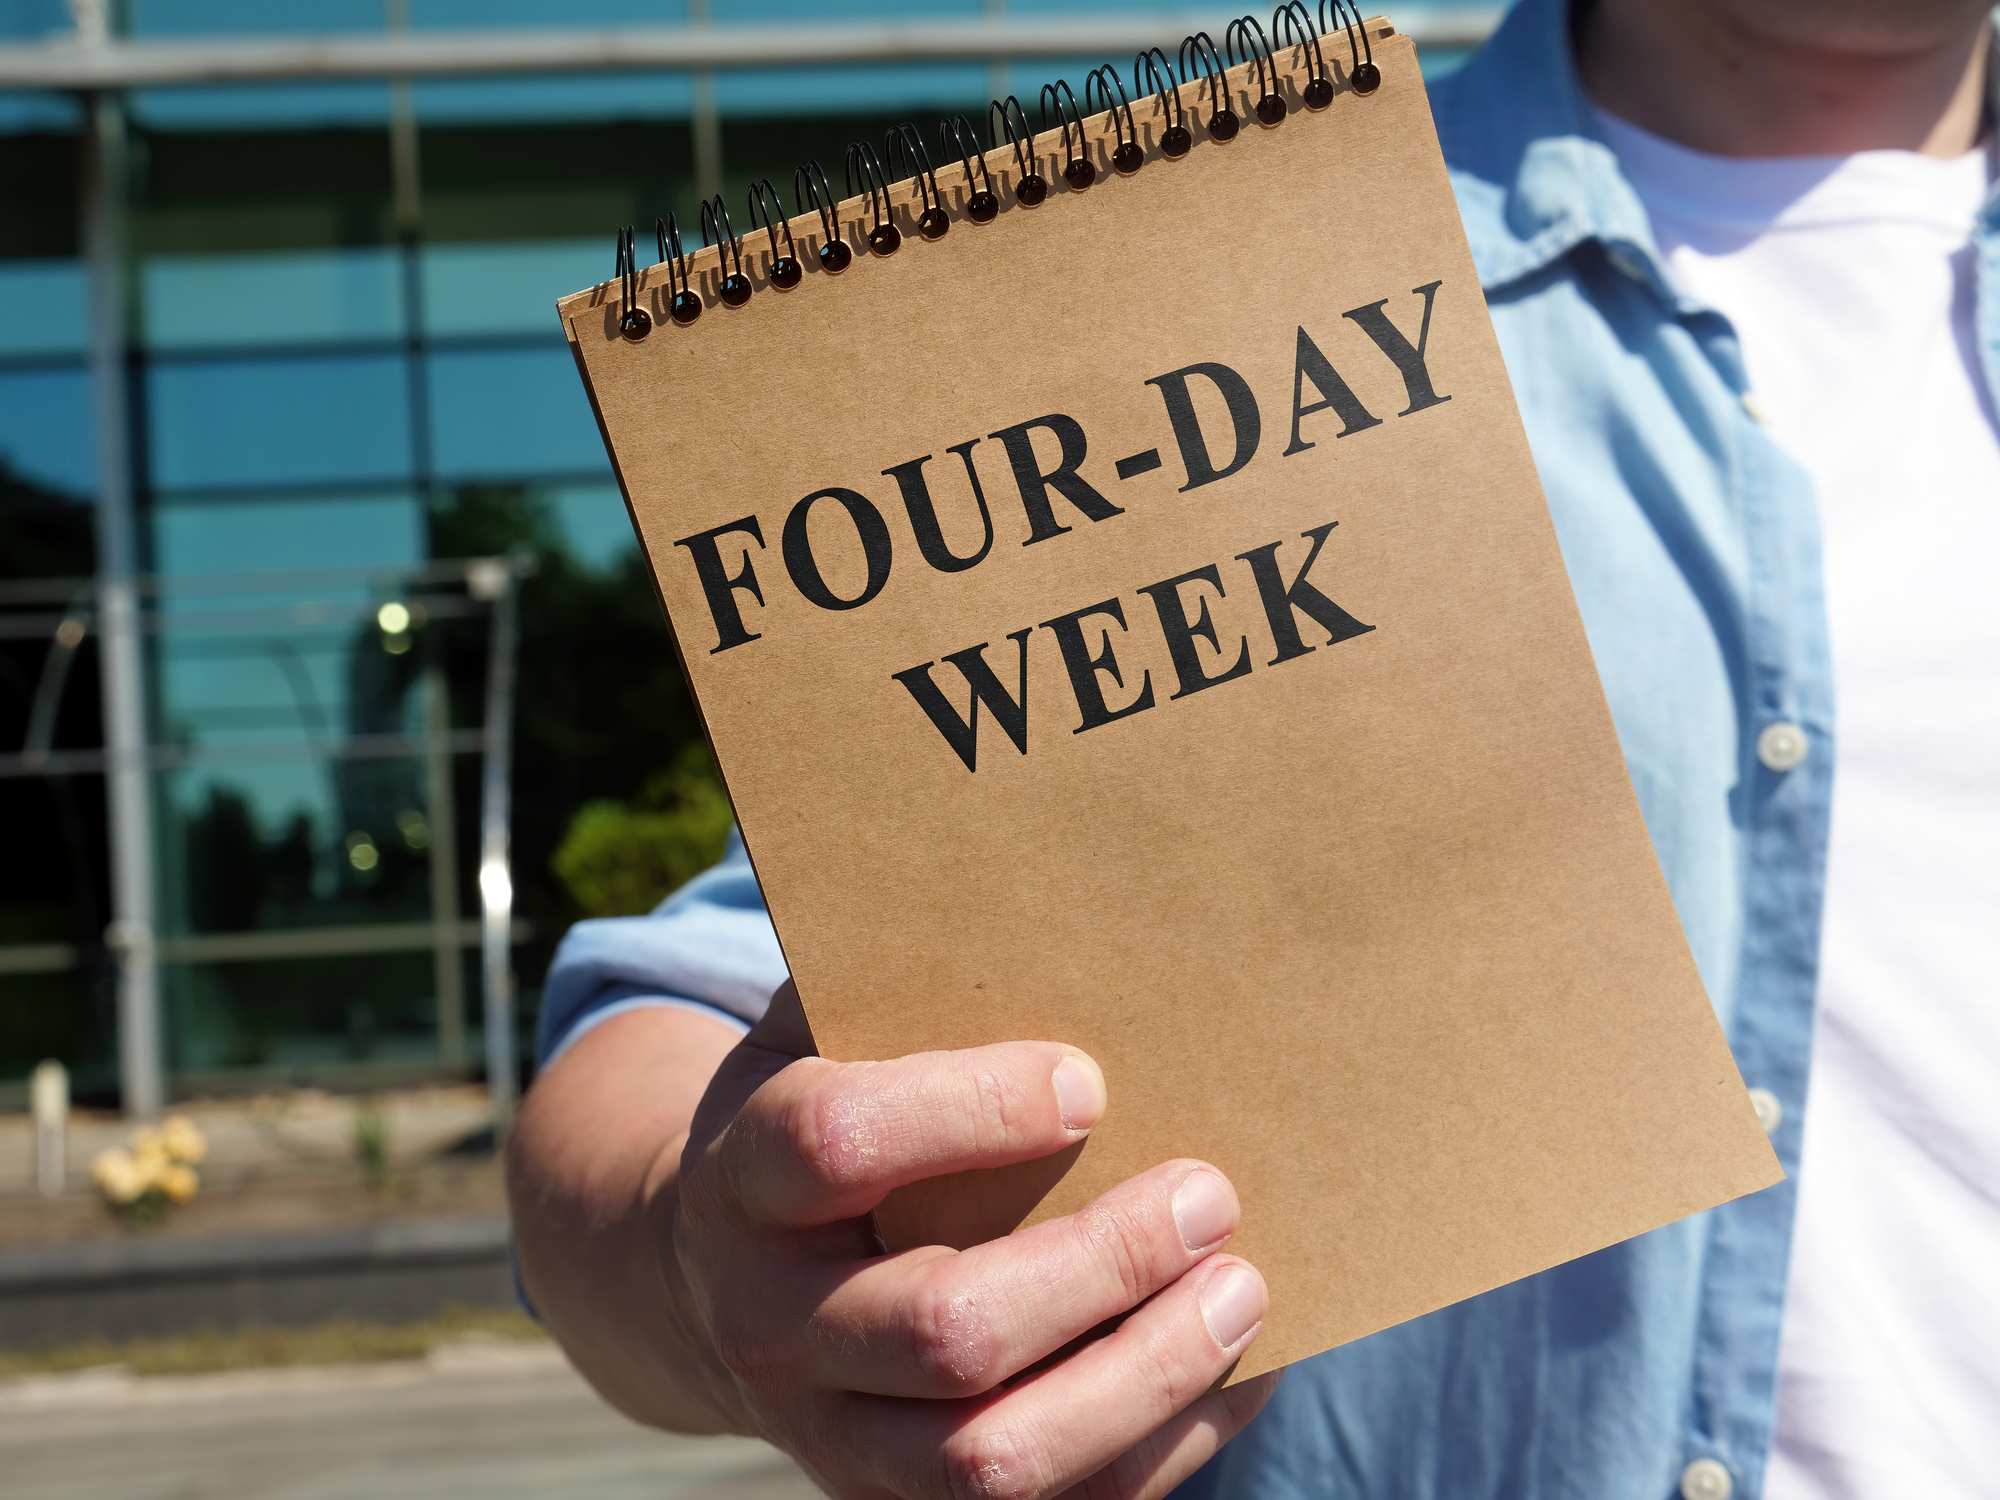 The four-day work week: Utopian ideal or secret weapon?